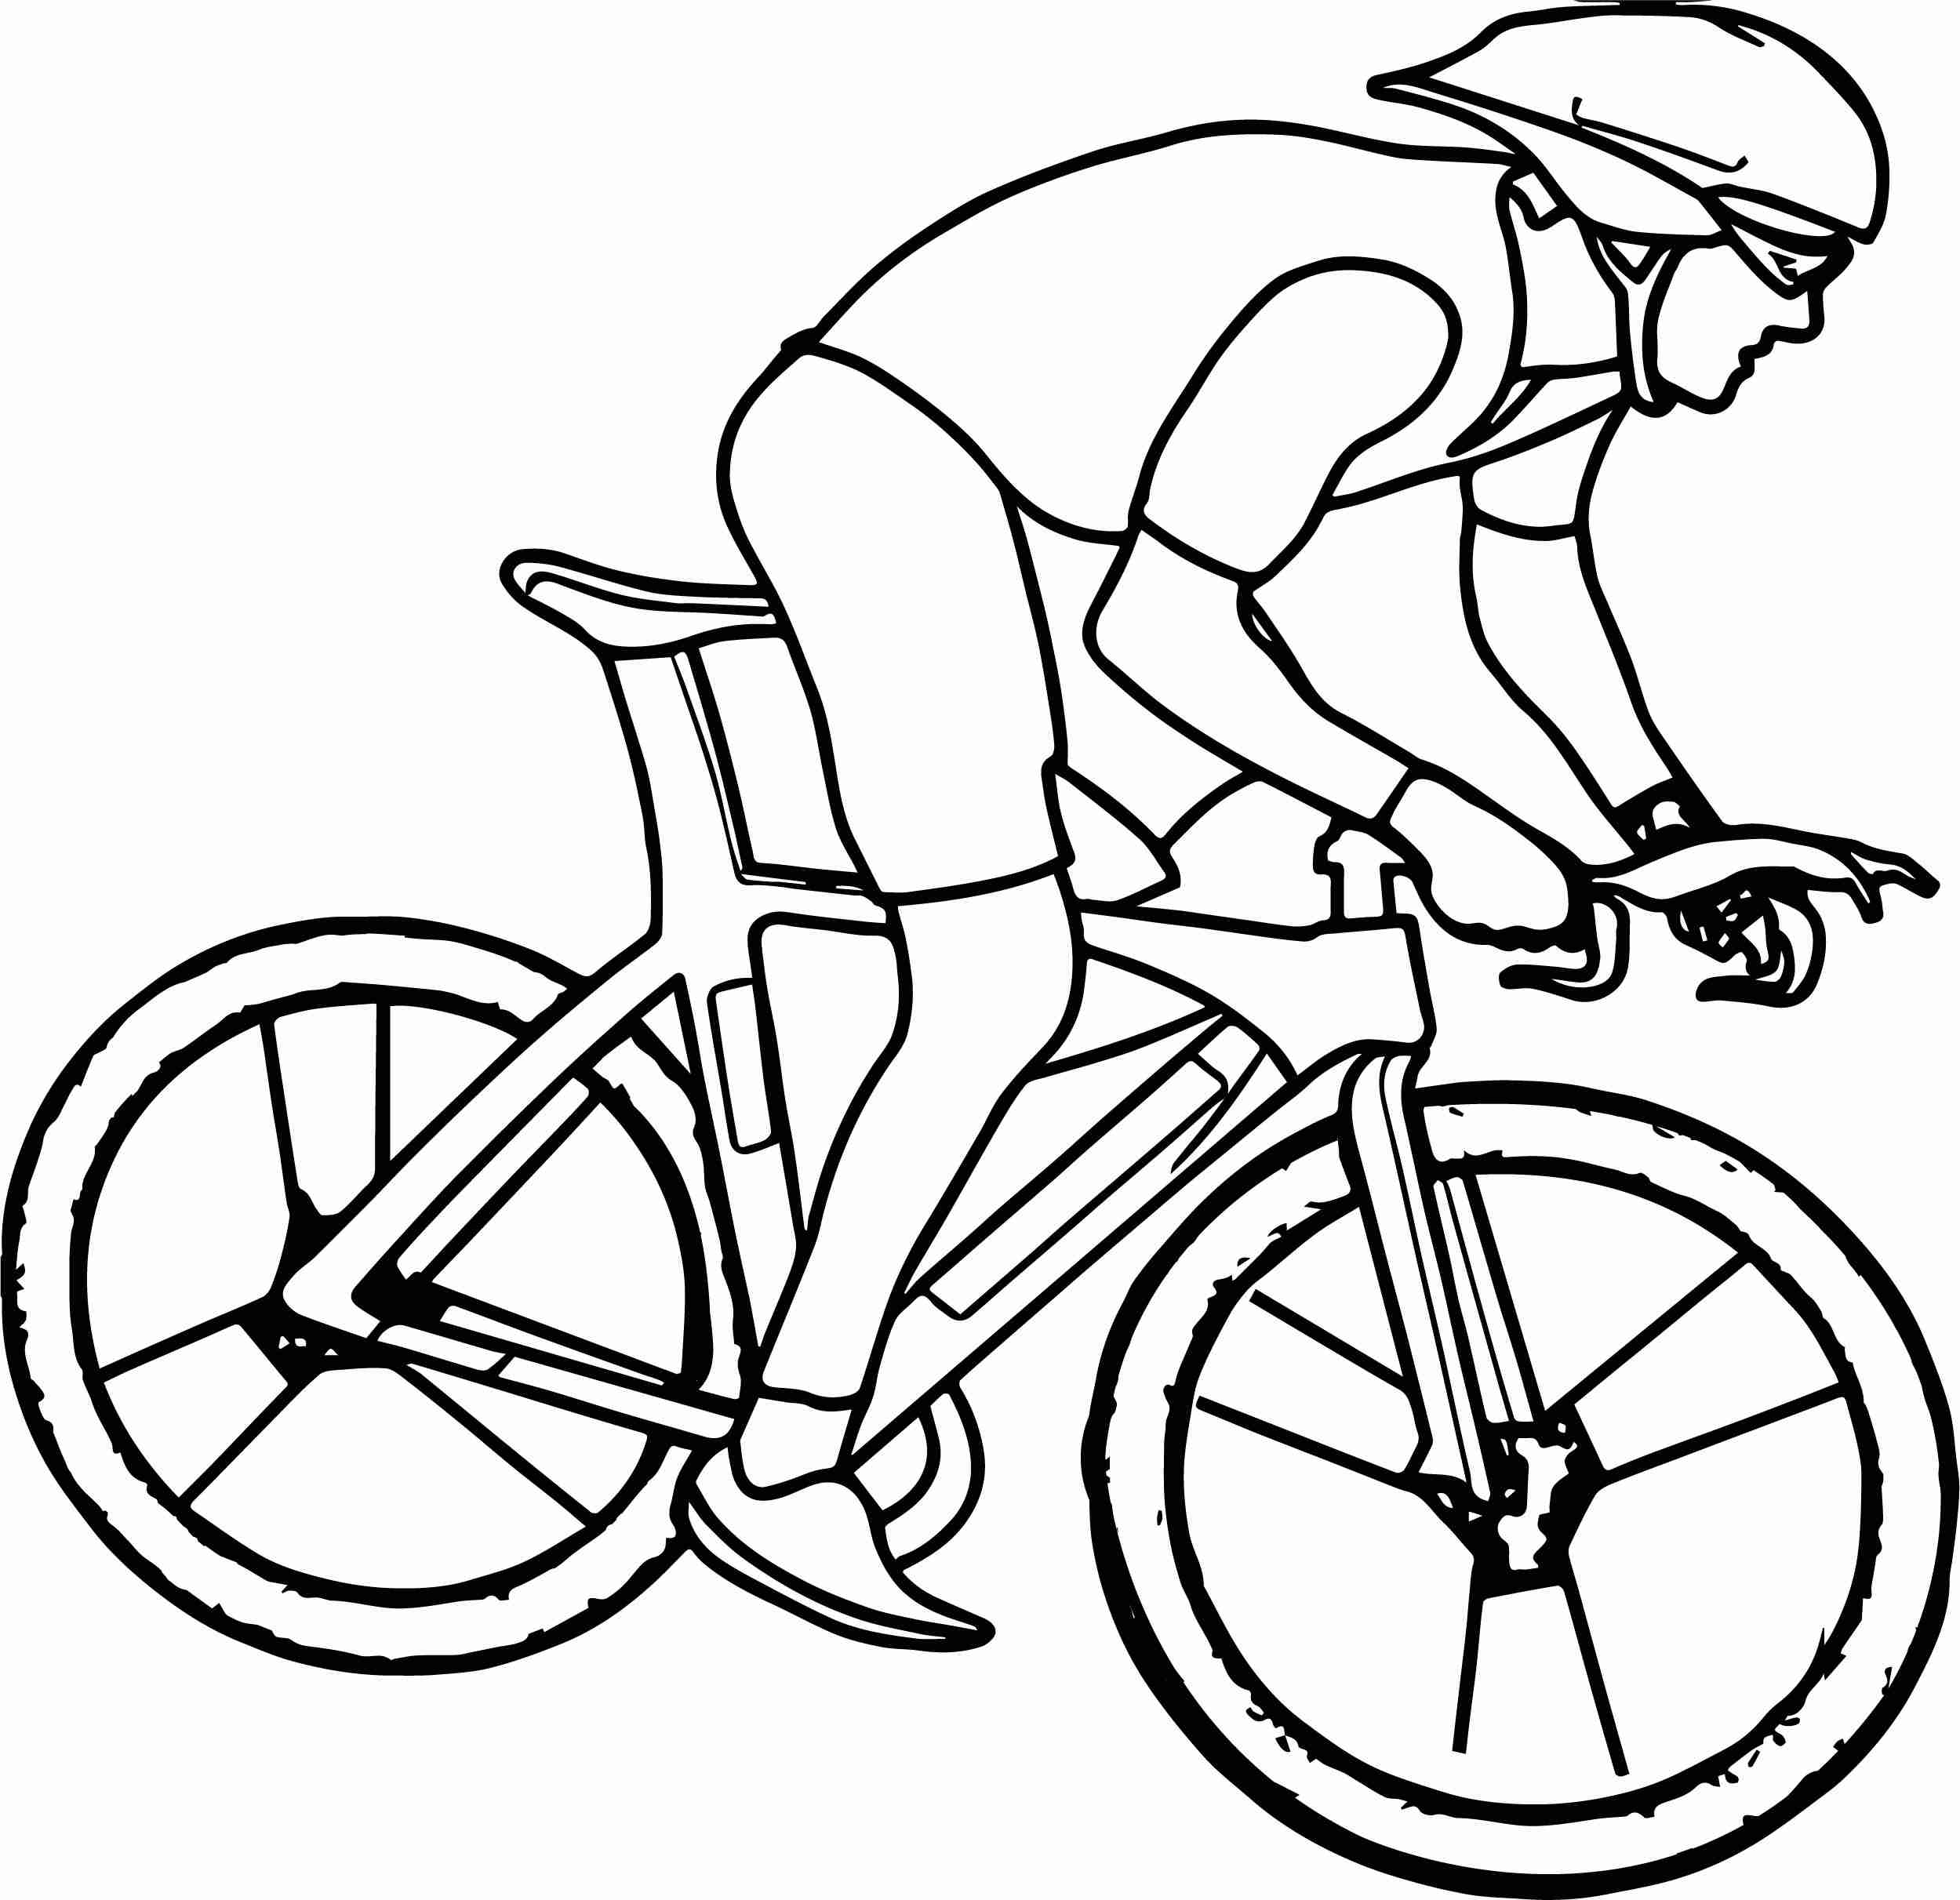 Cycling Coloring Pages at Free printable colorings